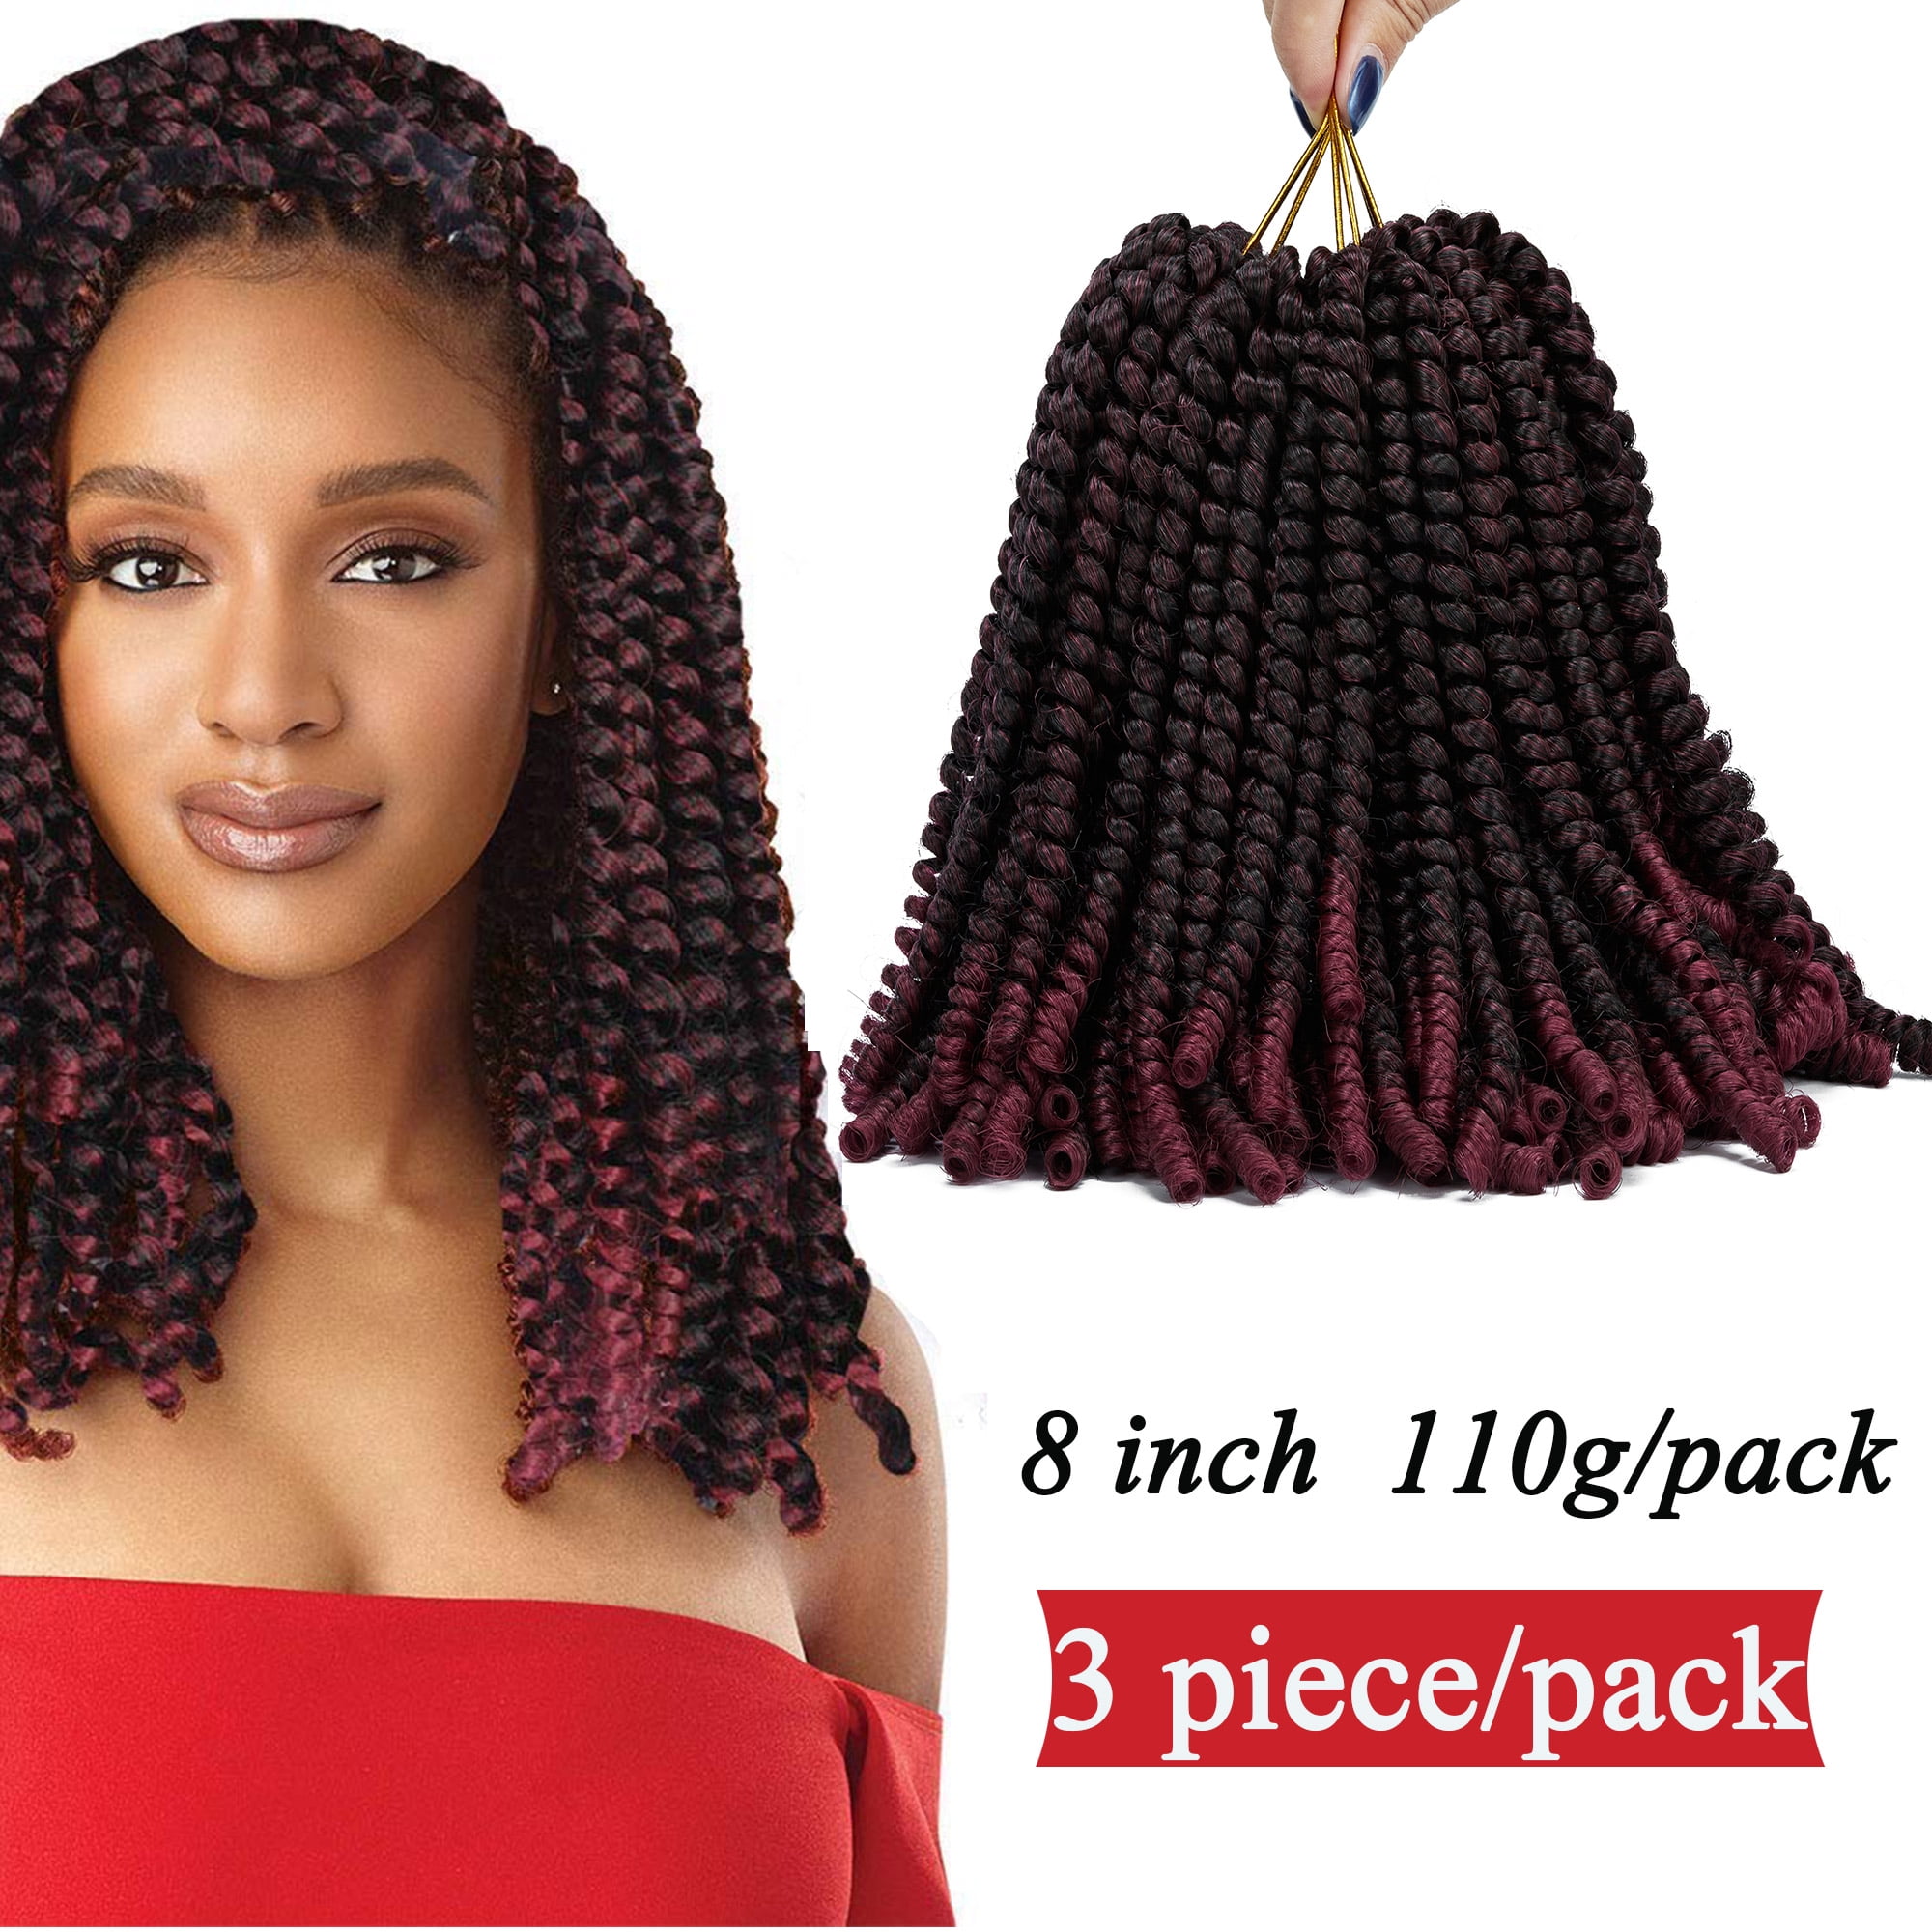 3 Packs Pre Twisted Spring Twist Hair 8 Inch Fluffy Pre Twisted Passion Twists Short Mini Curly 